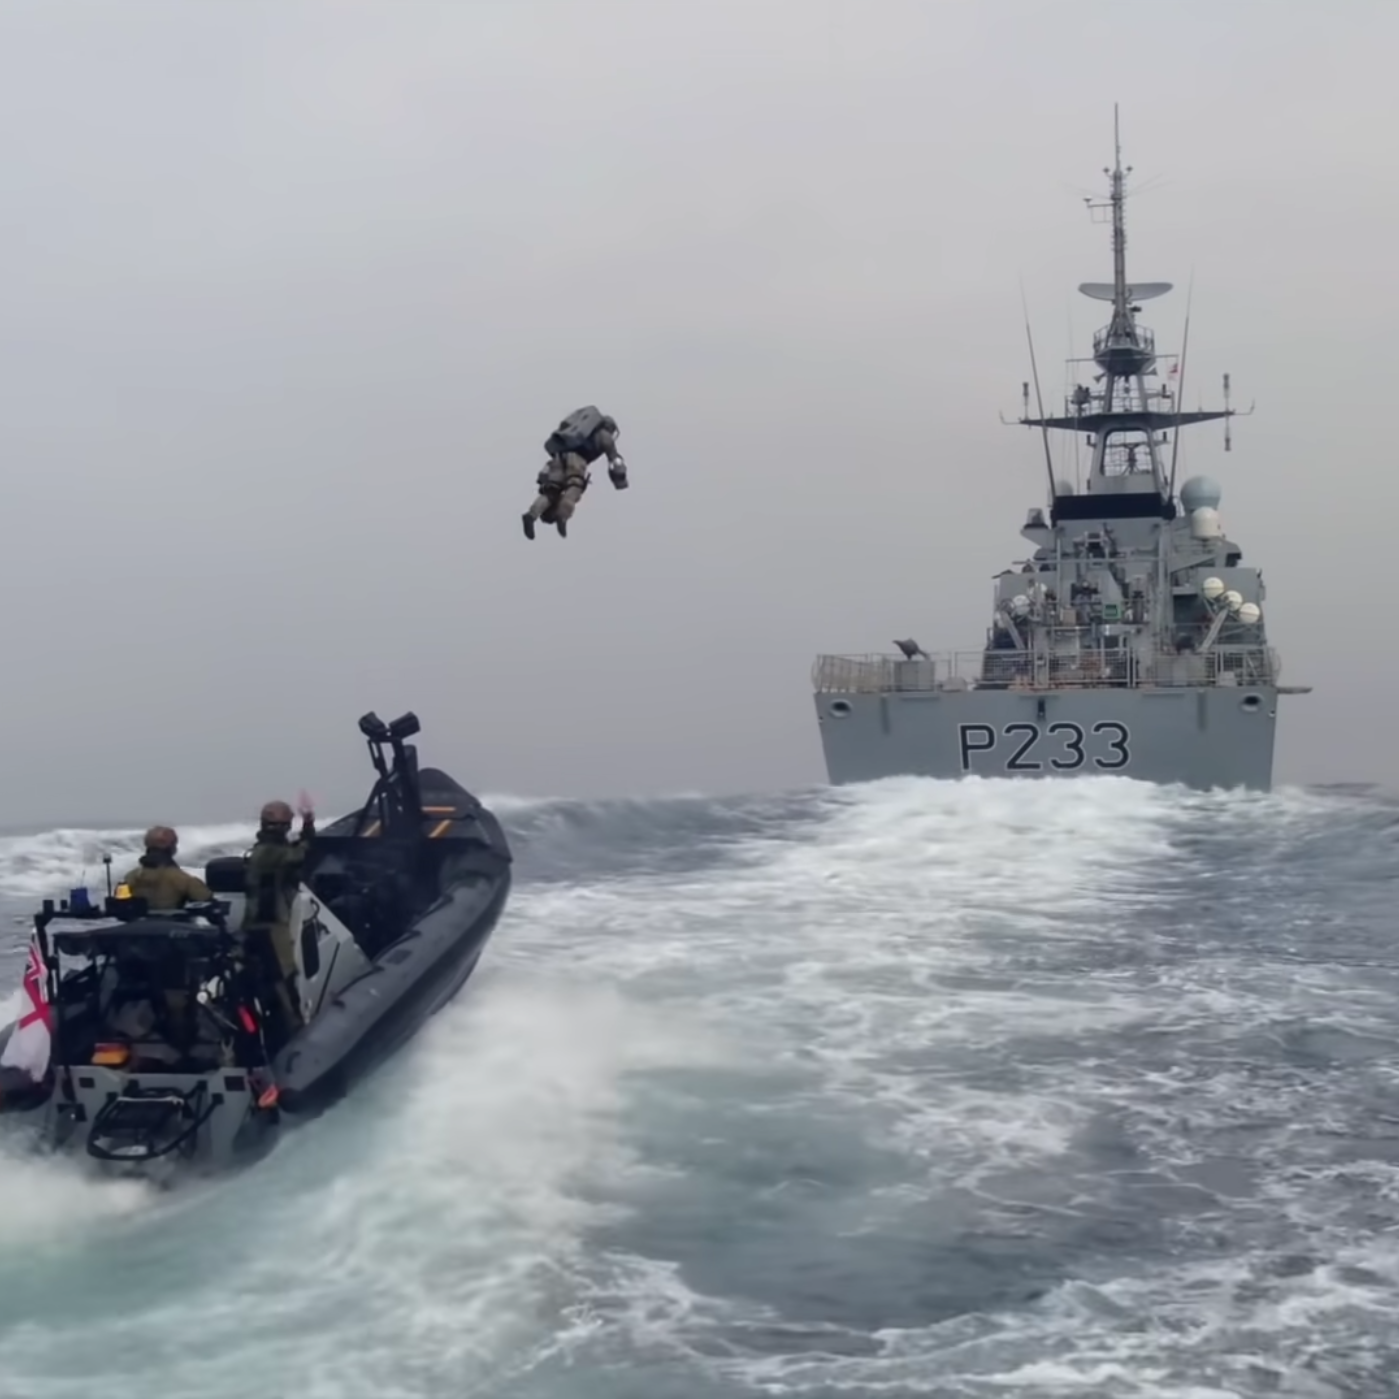 Watch a Marine Zoom From One Boat to Another ... With a Jetpack